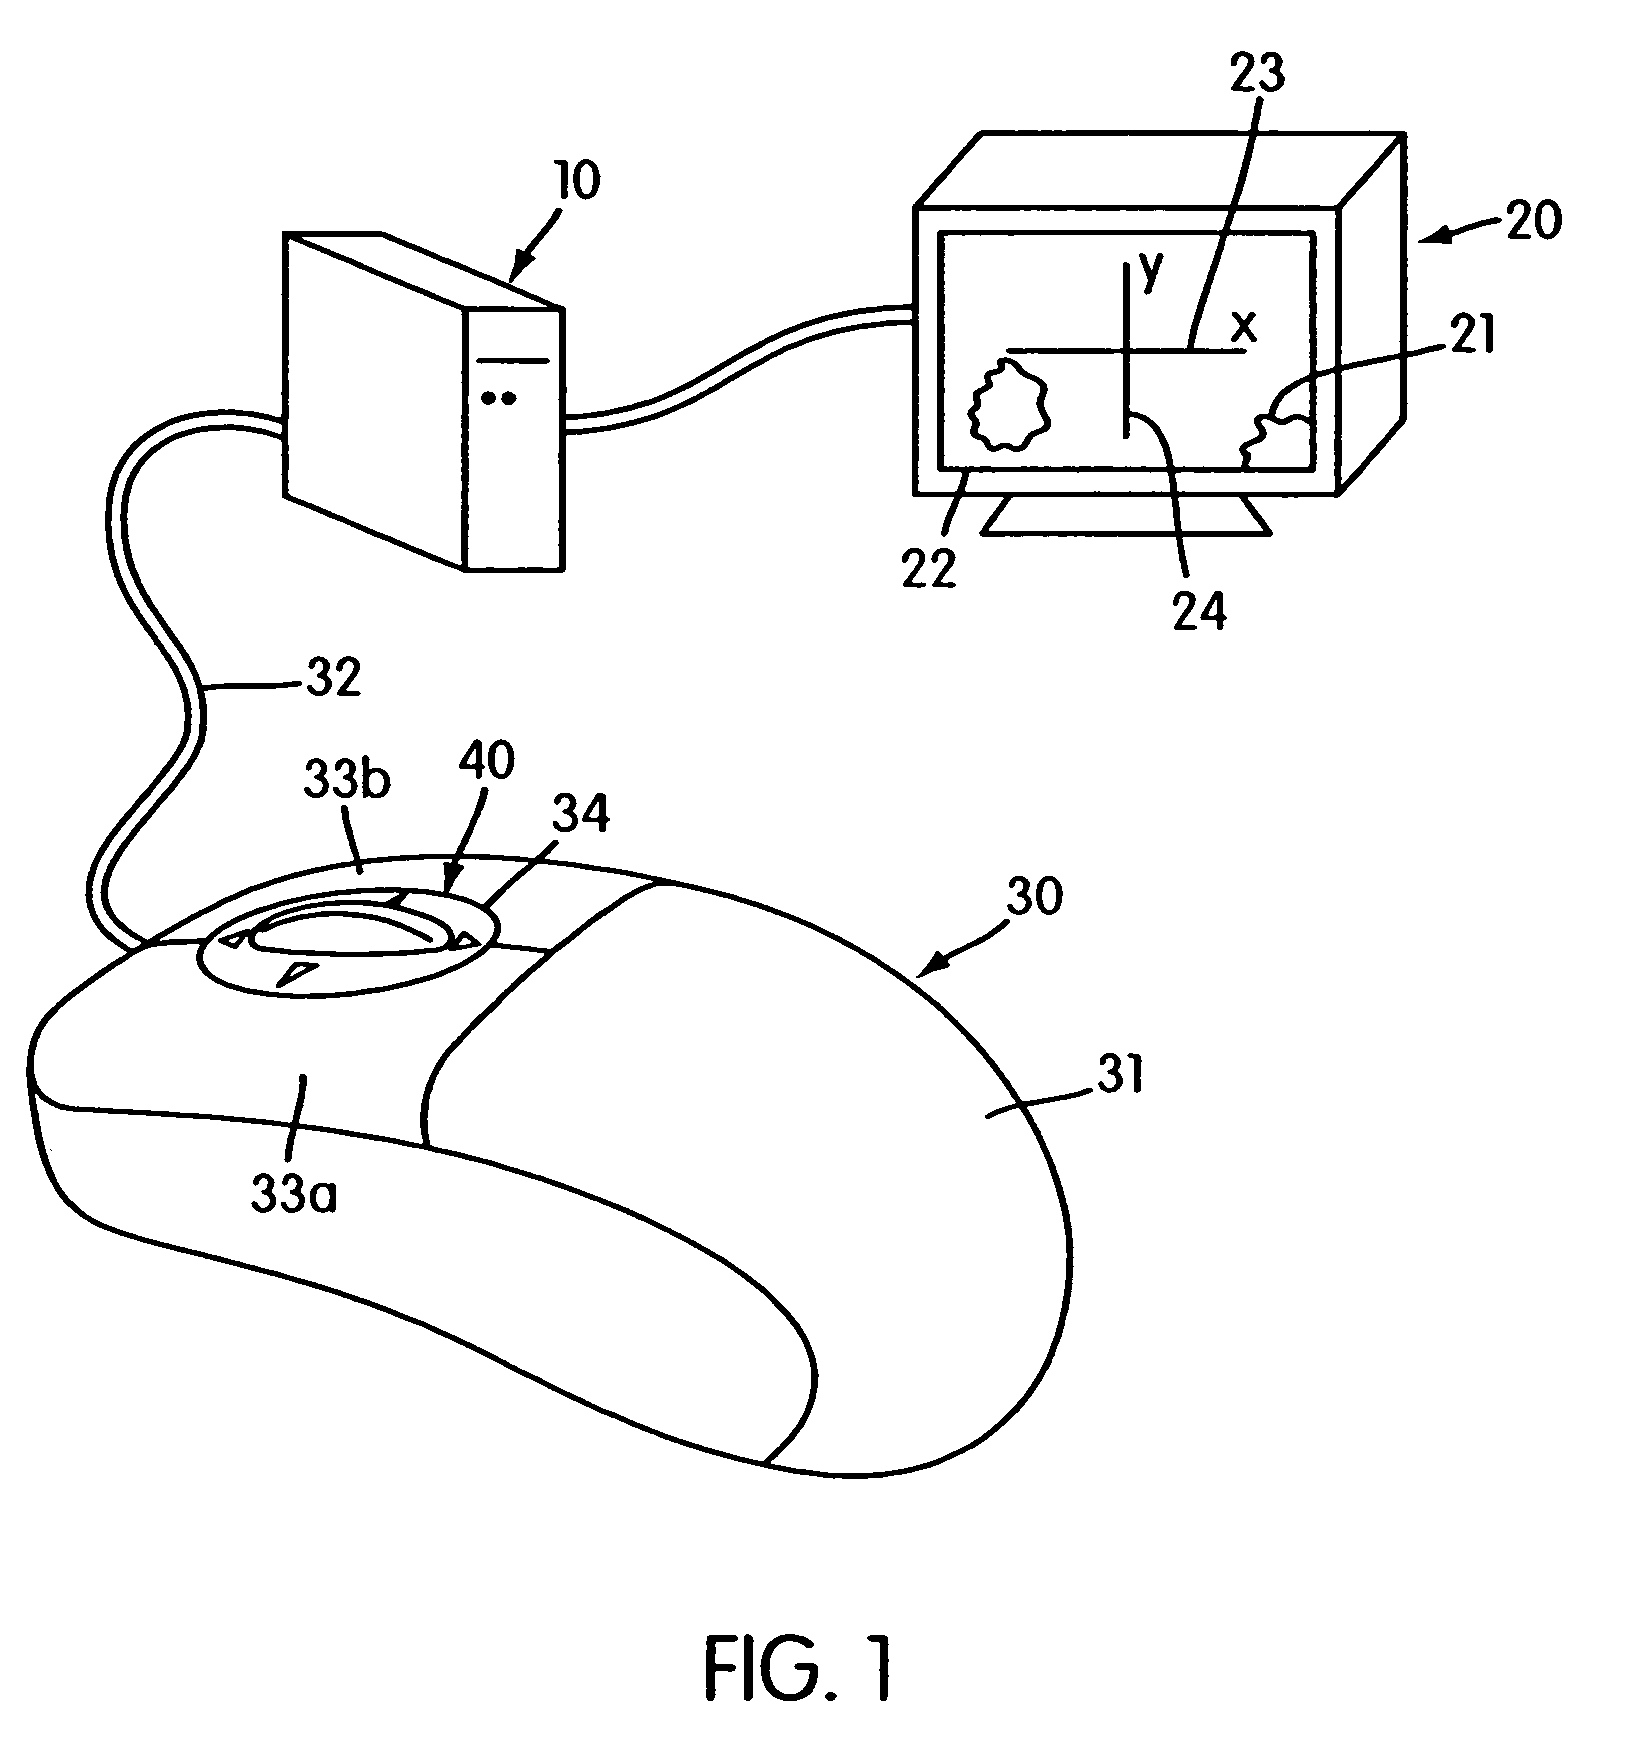 Scrolling apparatus providing multi-directional movement of an image